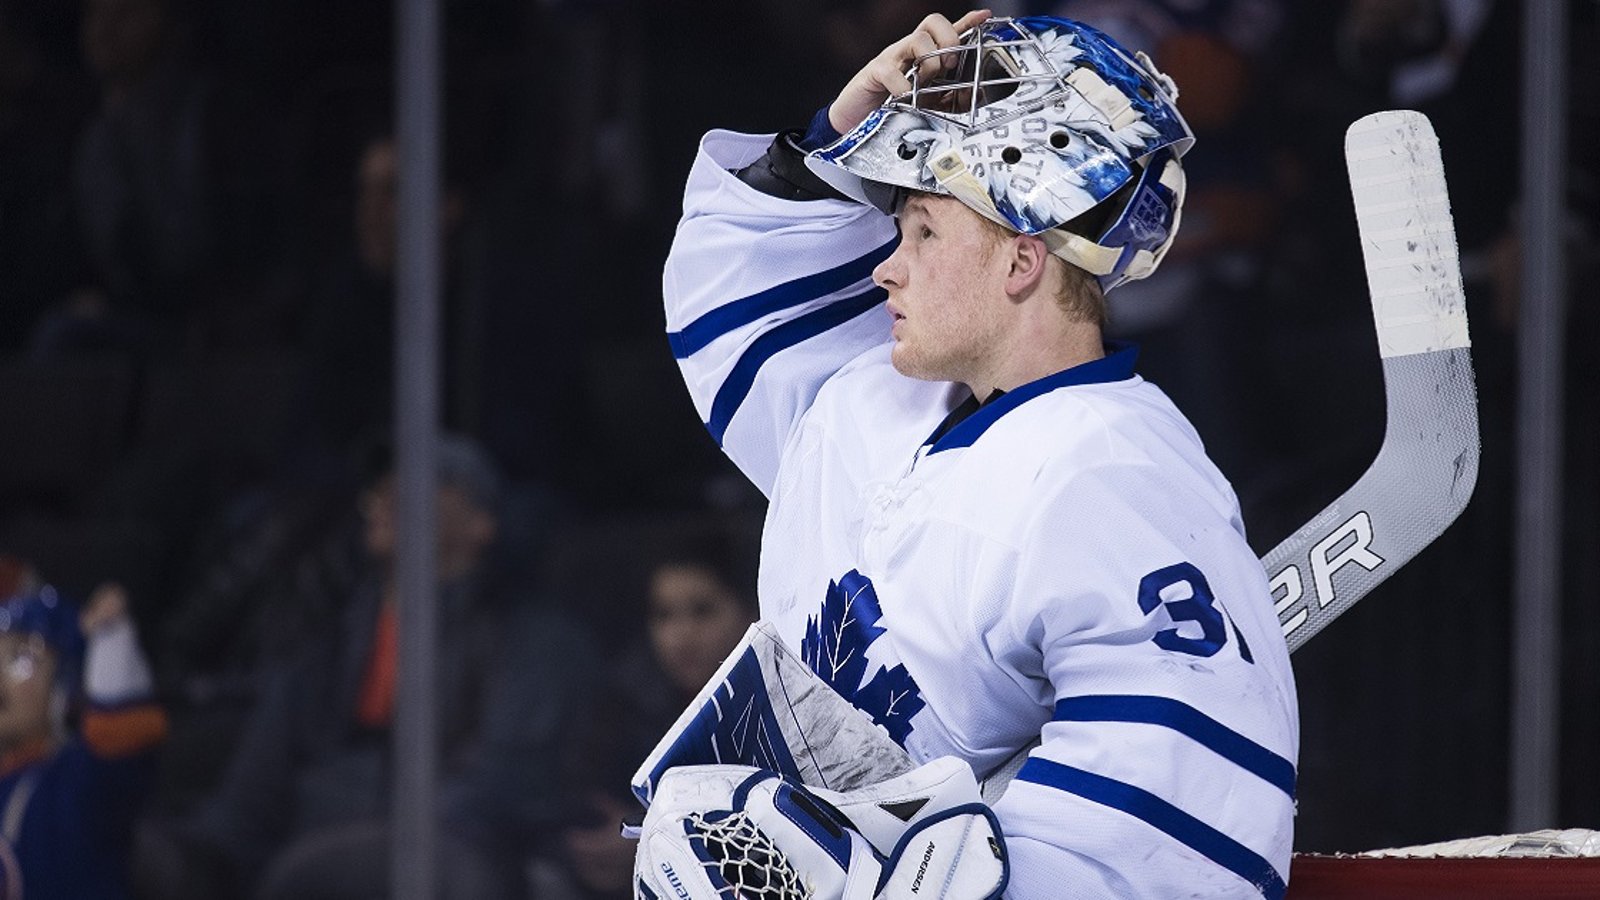 Big updates on the status of Frederik Andersen from Leafs practice today.